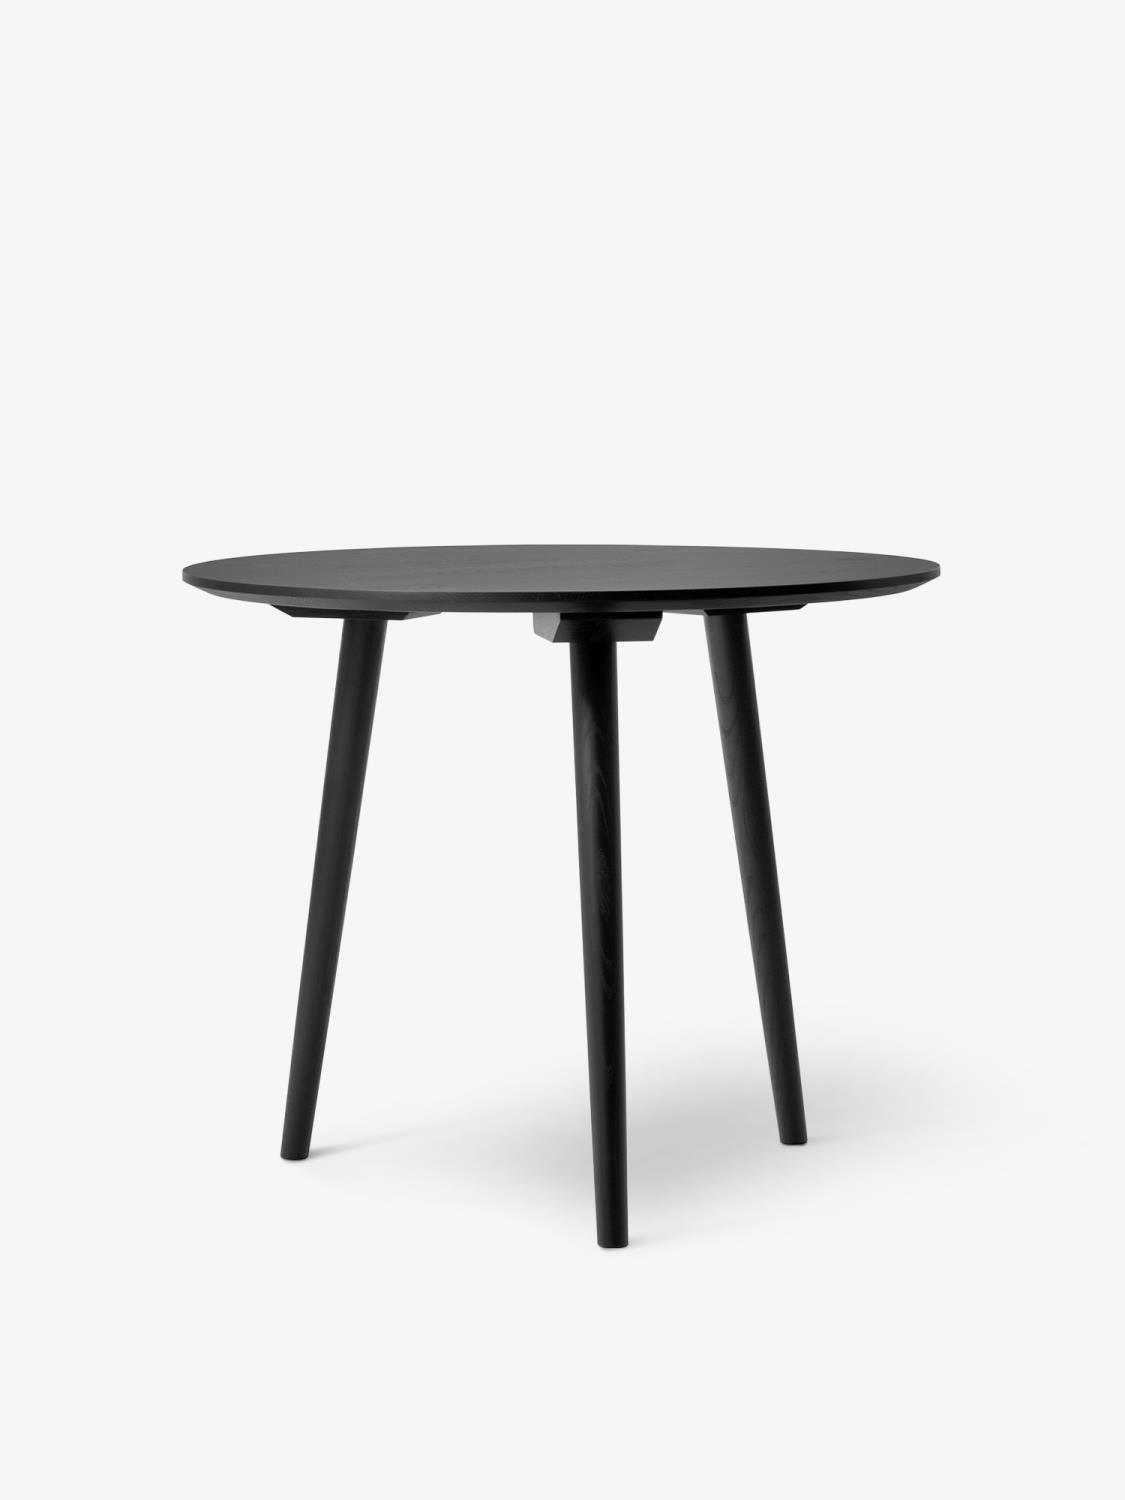 &Tradition - In Between Table SK3 - Black Lacquered Oak